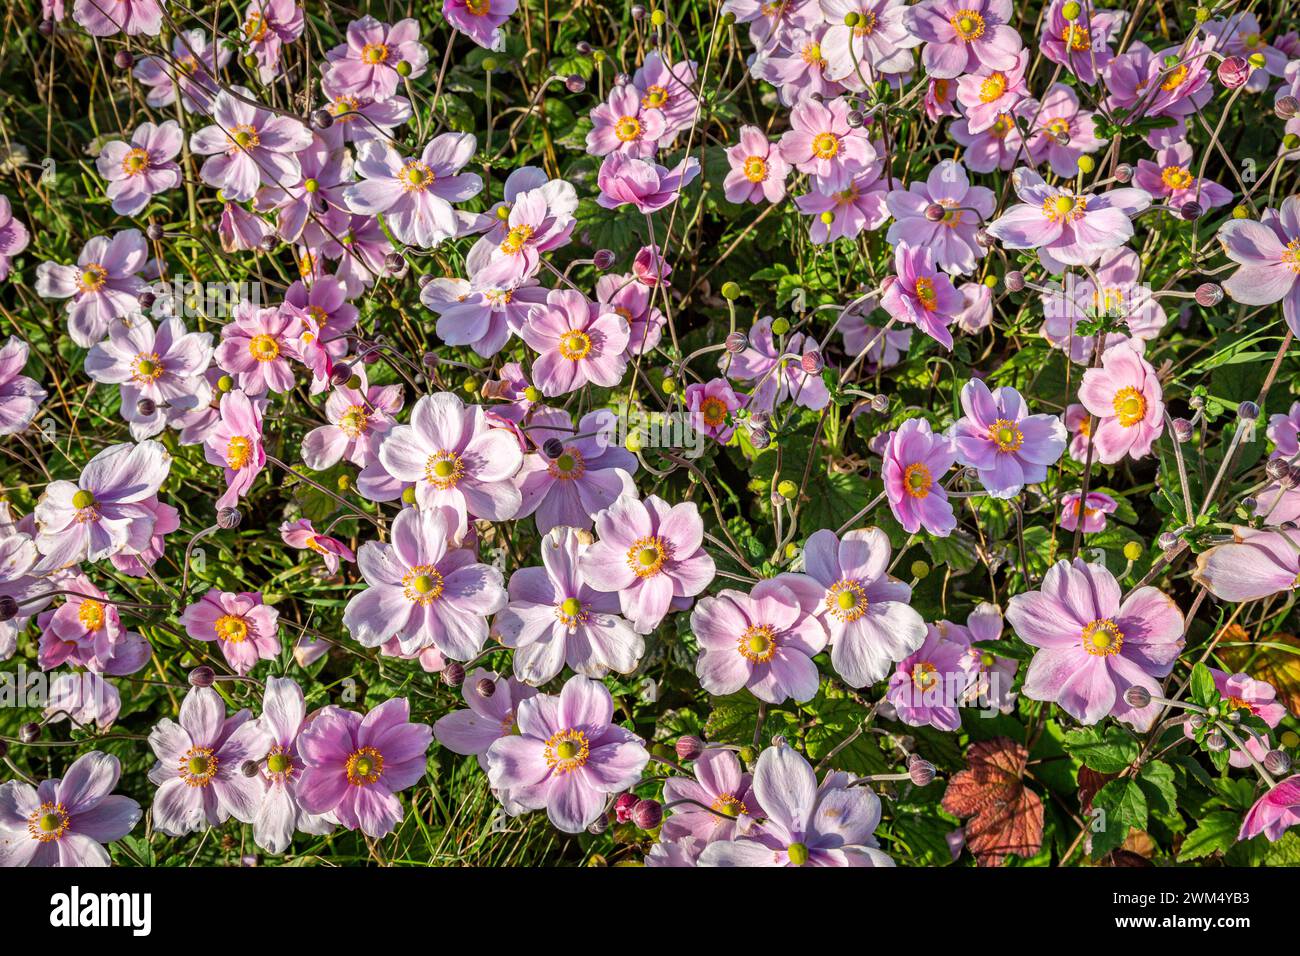 A full frame photograph of pink anemone flowers in bloom Stock Photo